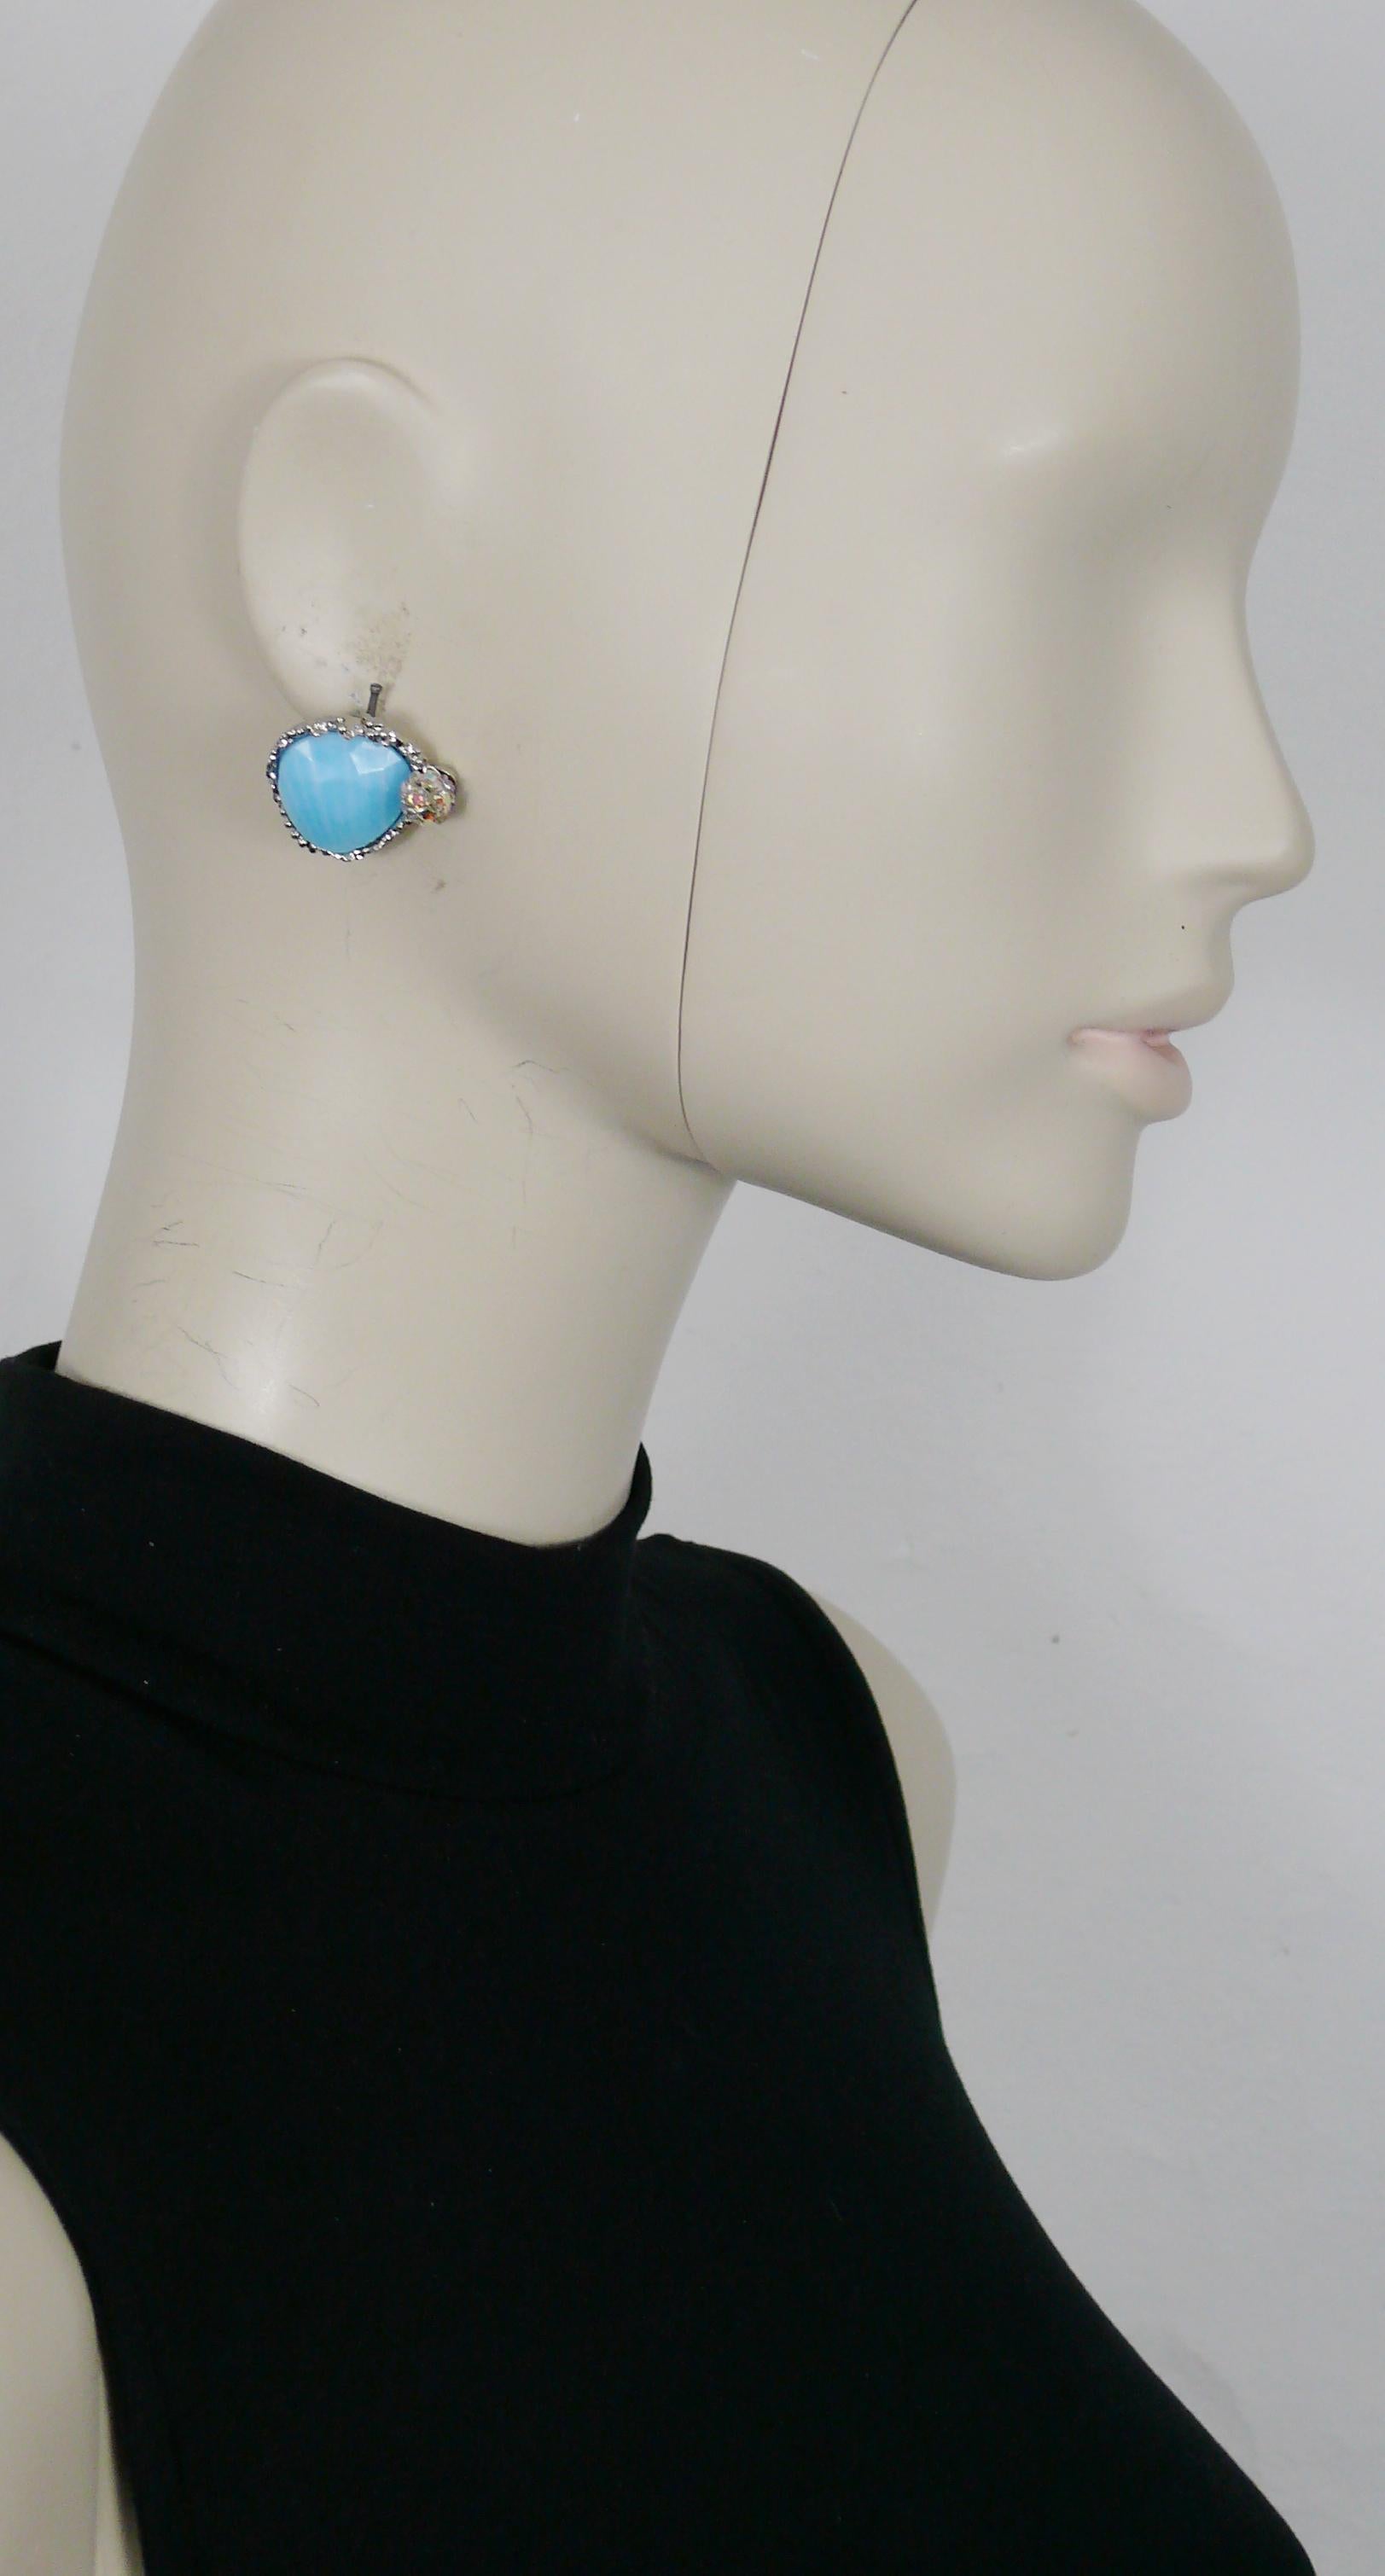 CHRISTIAN LACROIX vintage silver toned freeform clip-on earrings featuring a large marbled blue facetted glass cabochon and a crystal ball.

Silver tone metal hardware.

Marked CHRISTIAN LACROIX CL Made in France.

Indicative measurements : height